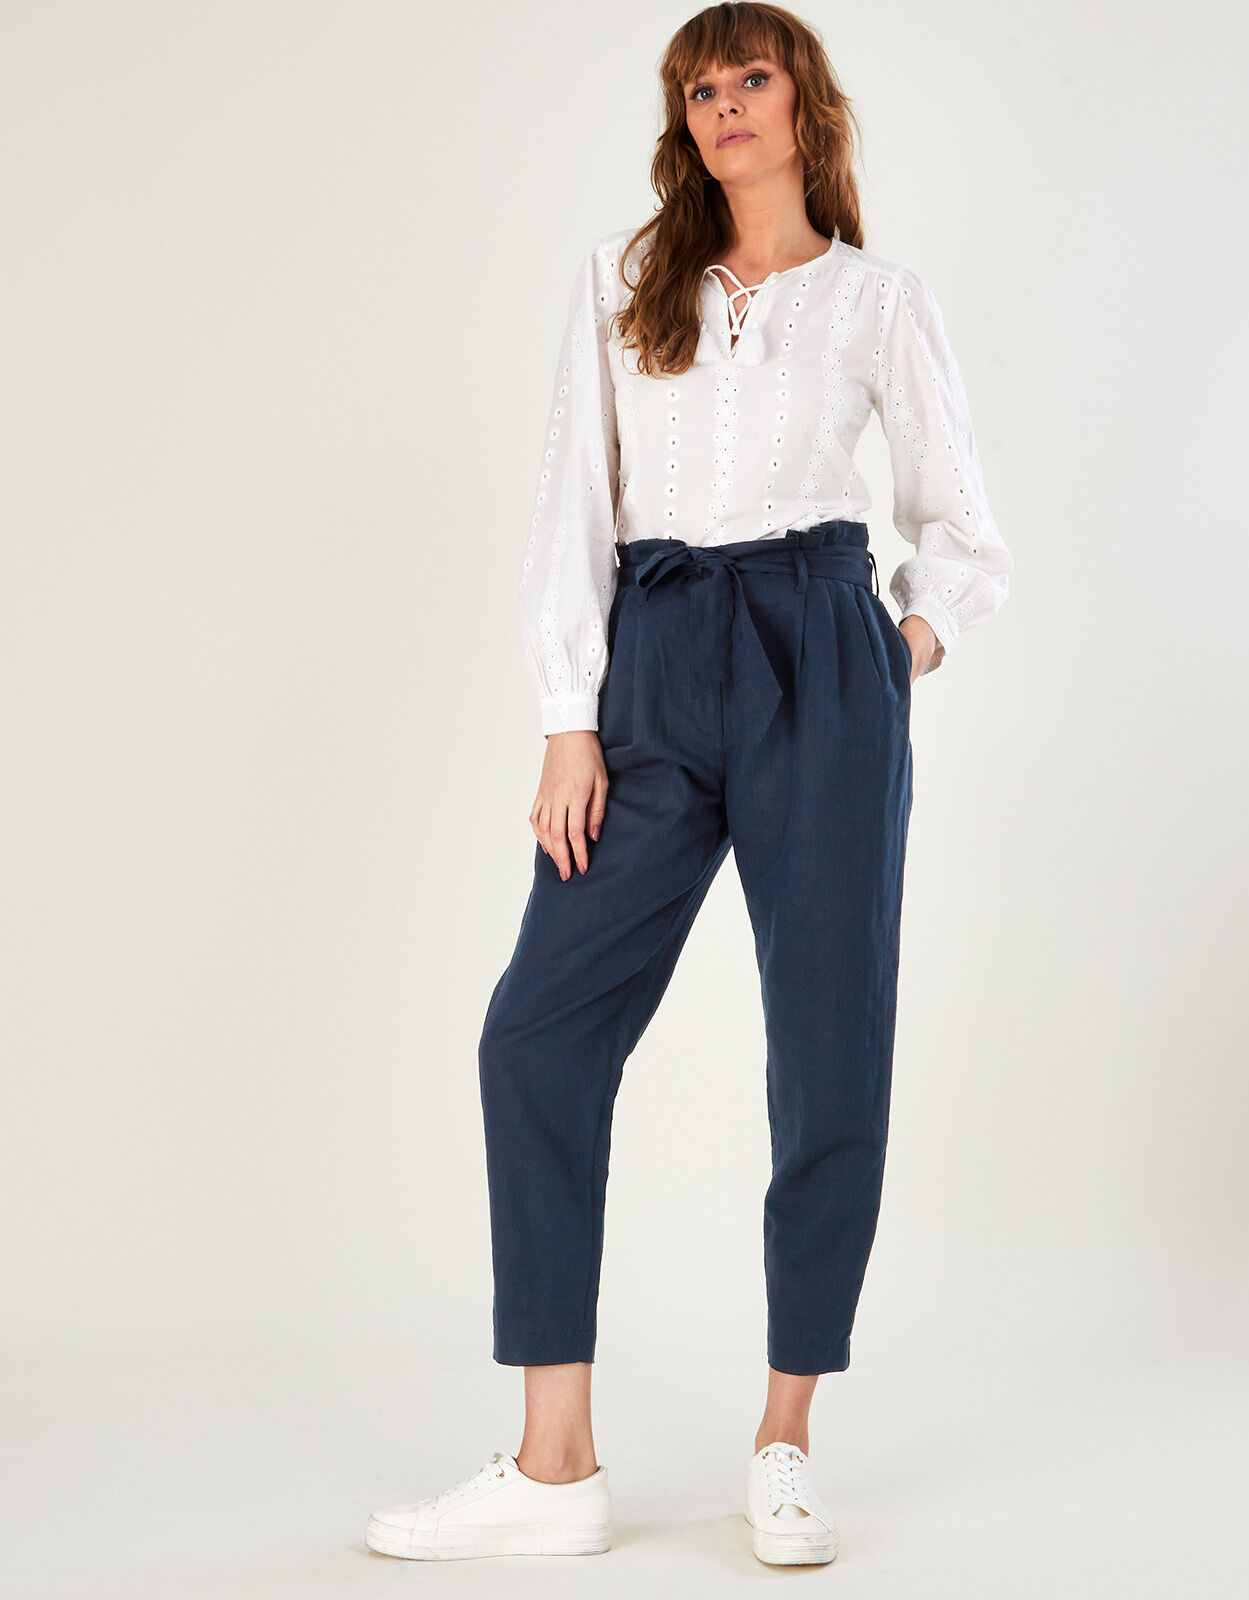 ASOS Tailored Wide Leg Culotte with Paper Bag Waist | ASOS | Paper bag  waist pants, Trouser outfits, Paper bag trousers outfit